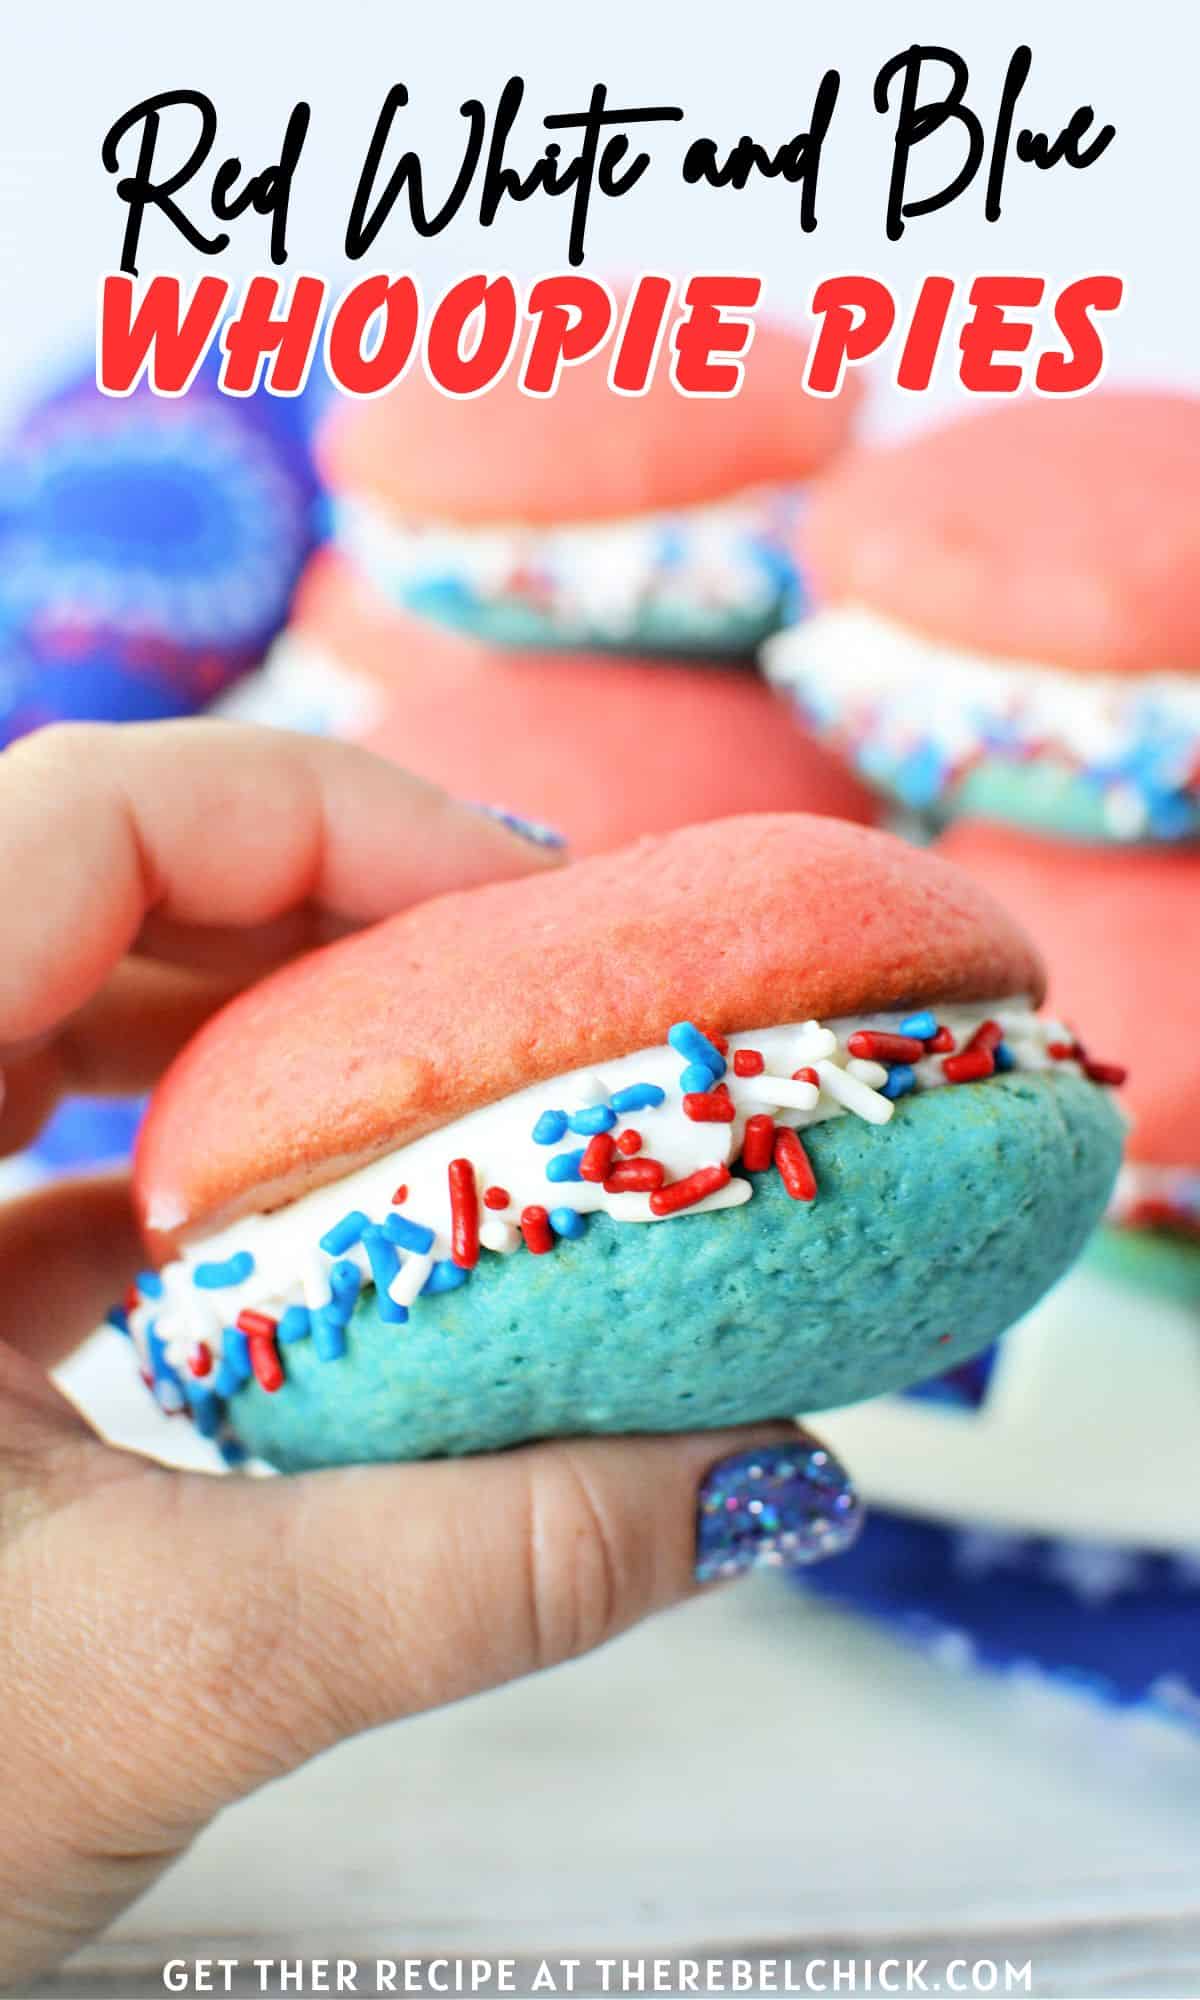 Red White and Blue Whoopie Pies Recipe